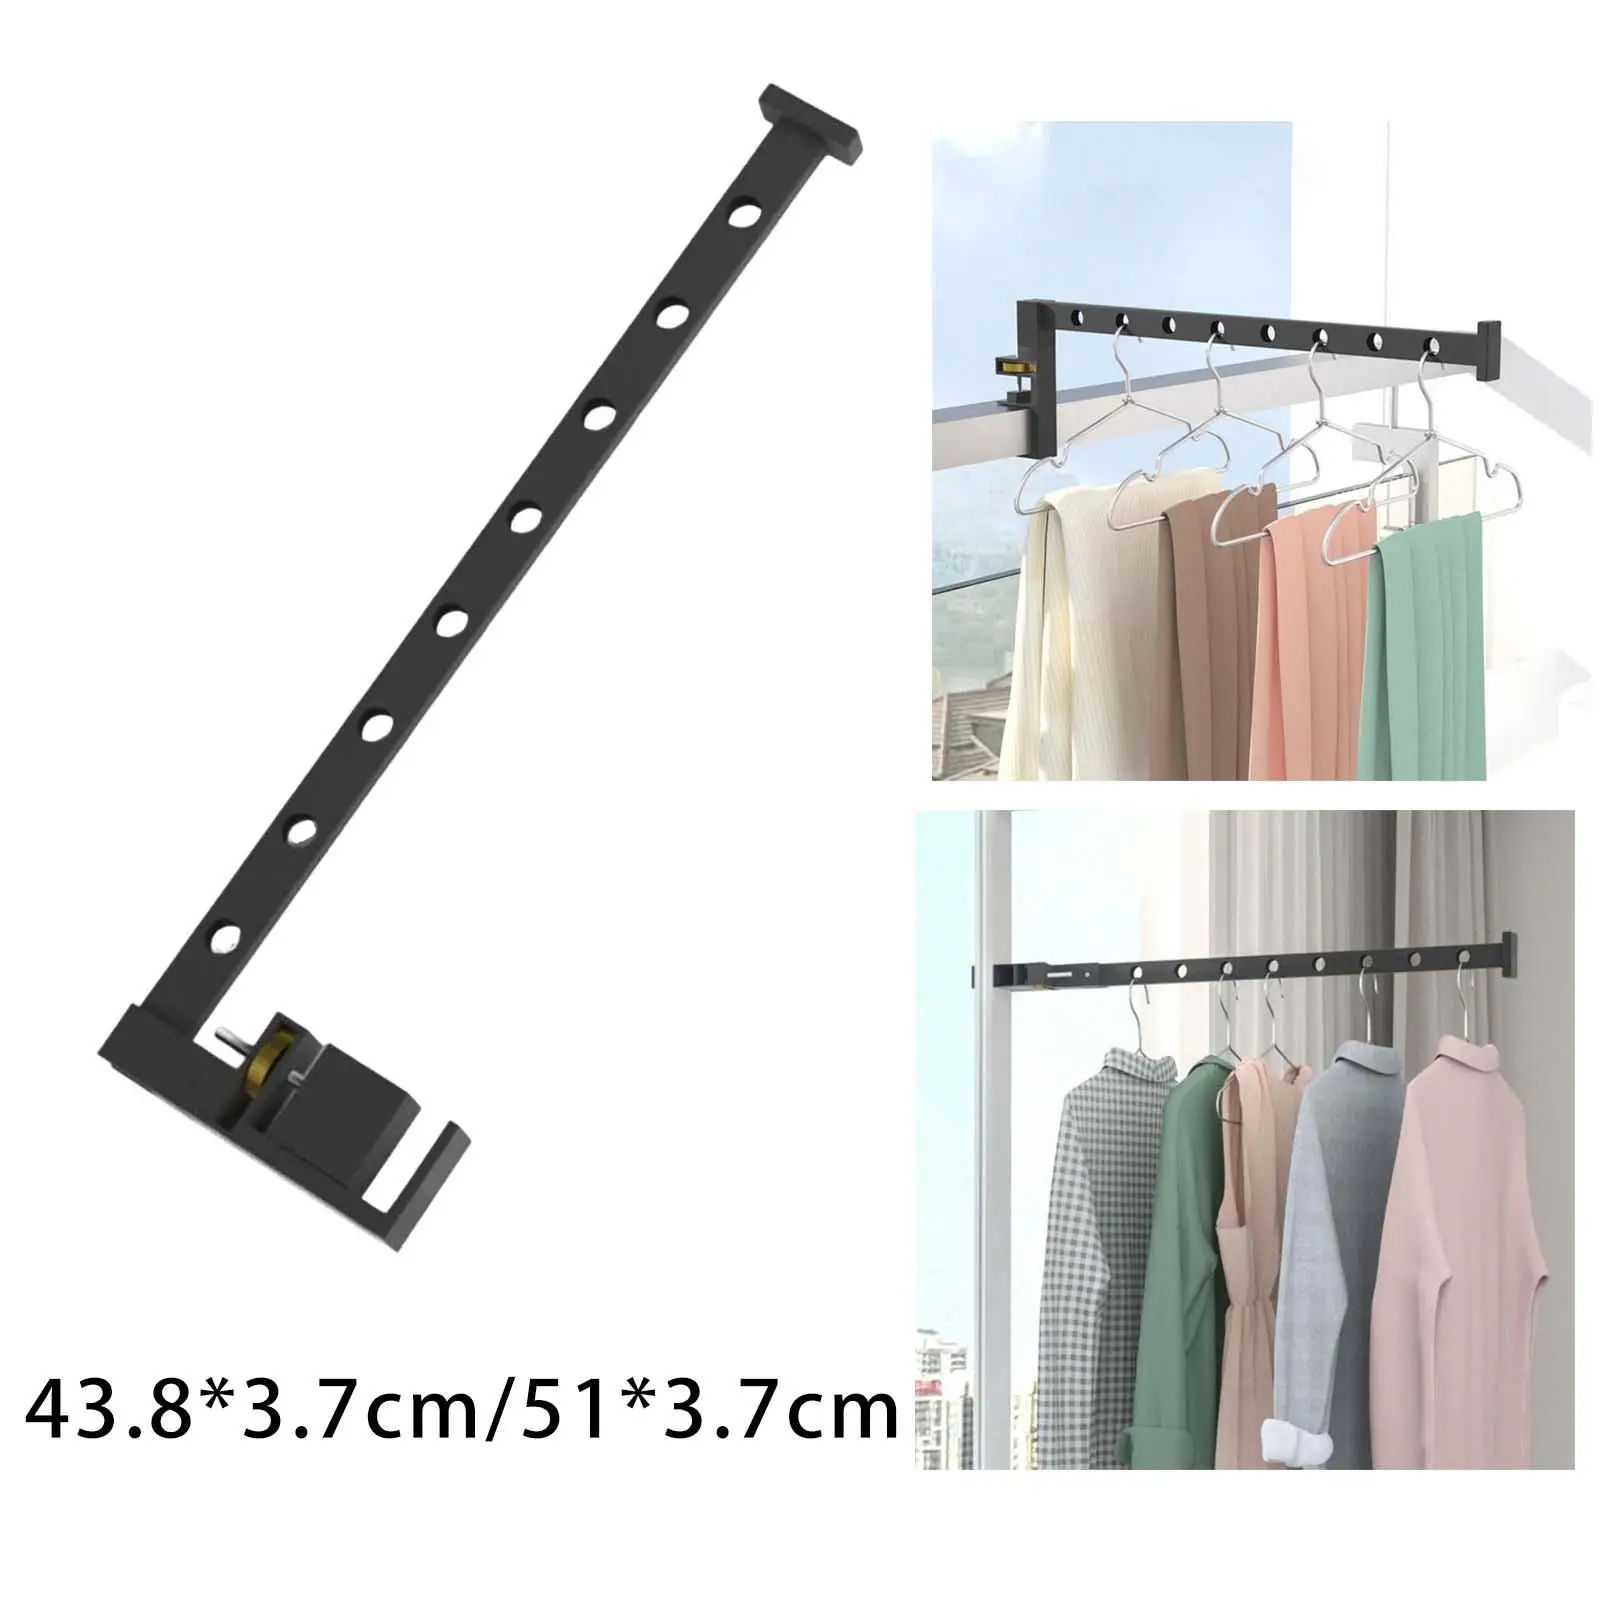 Drying Clothes Folding Clothes Hanger Collapsible Wall Mounted Clothes Hanger for Window Balcony Bedroom Kids Clothes Jackets